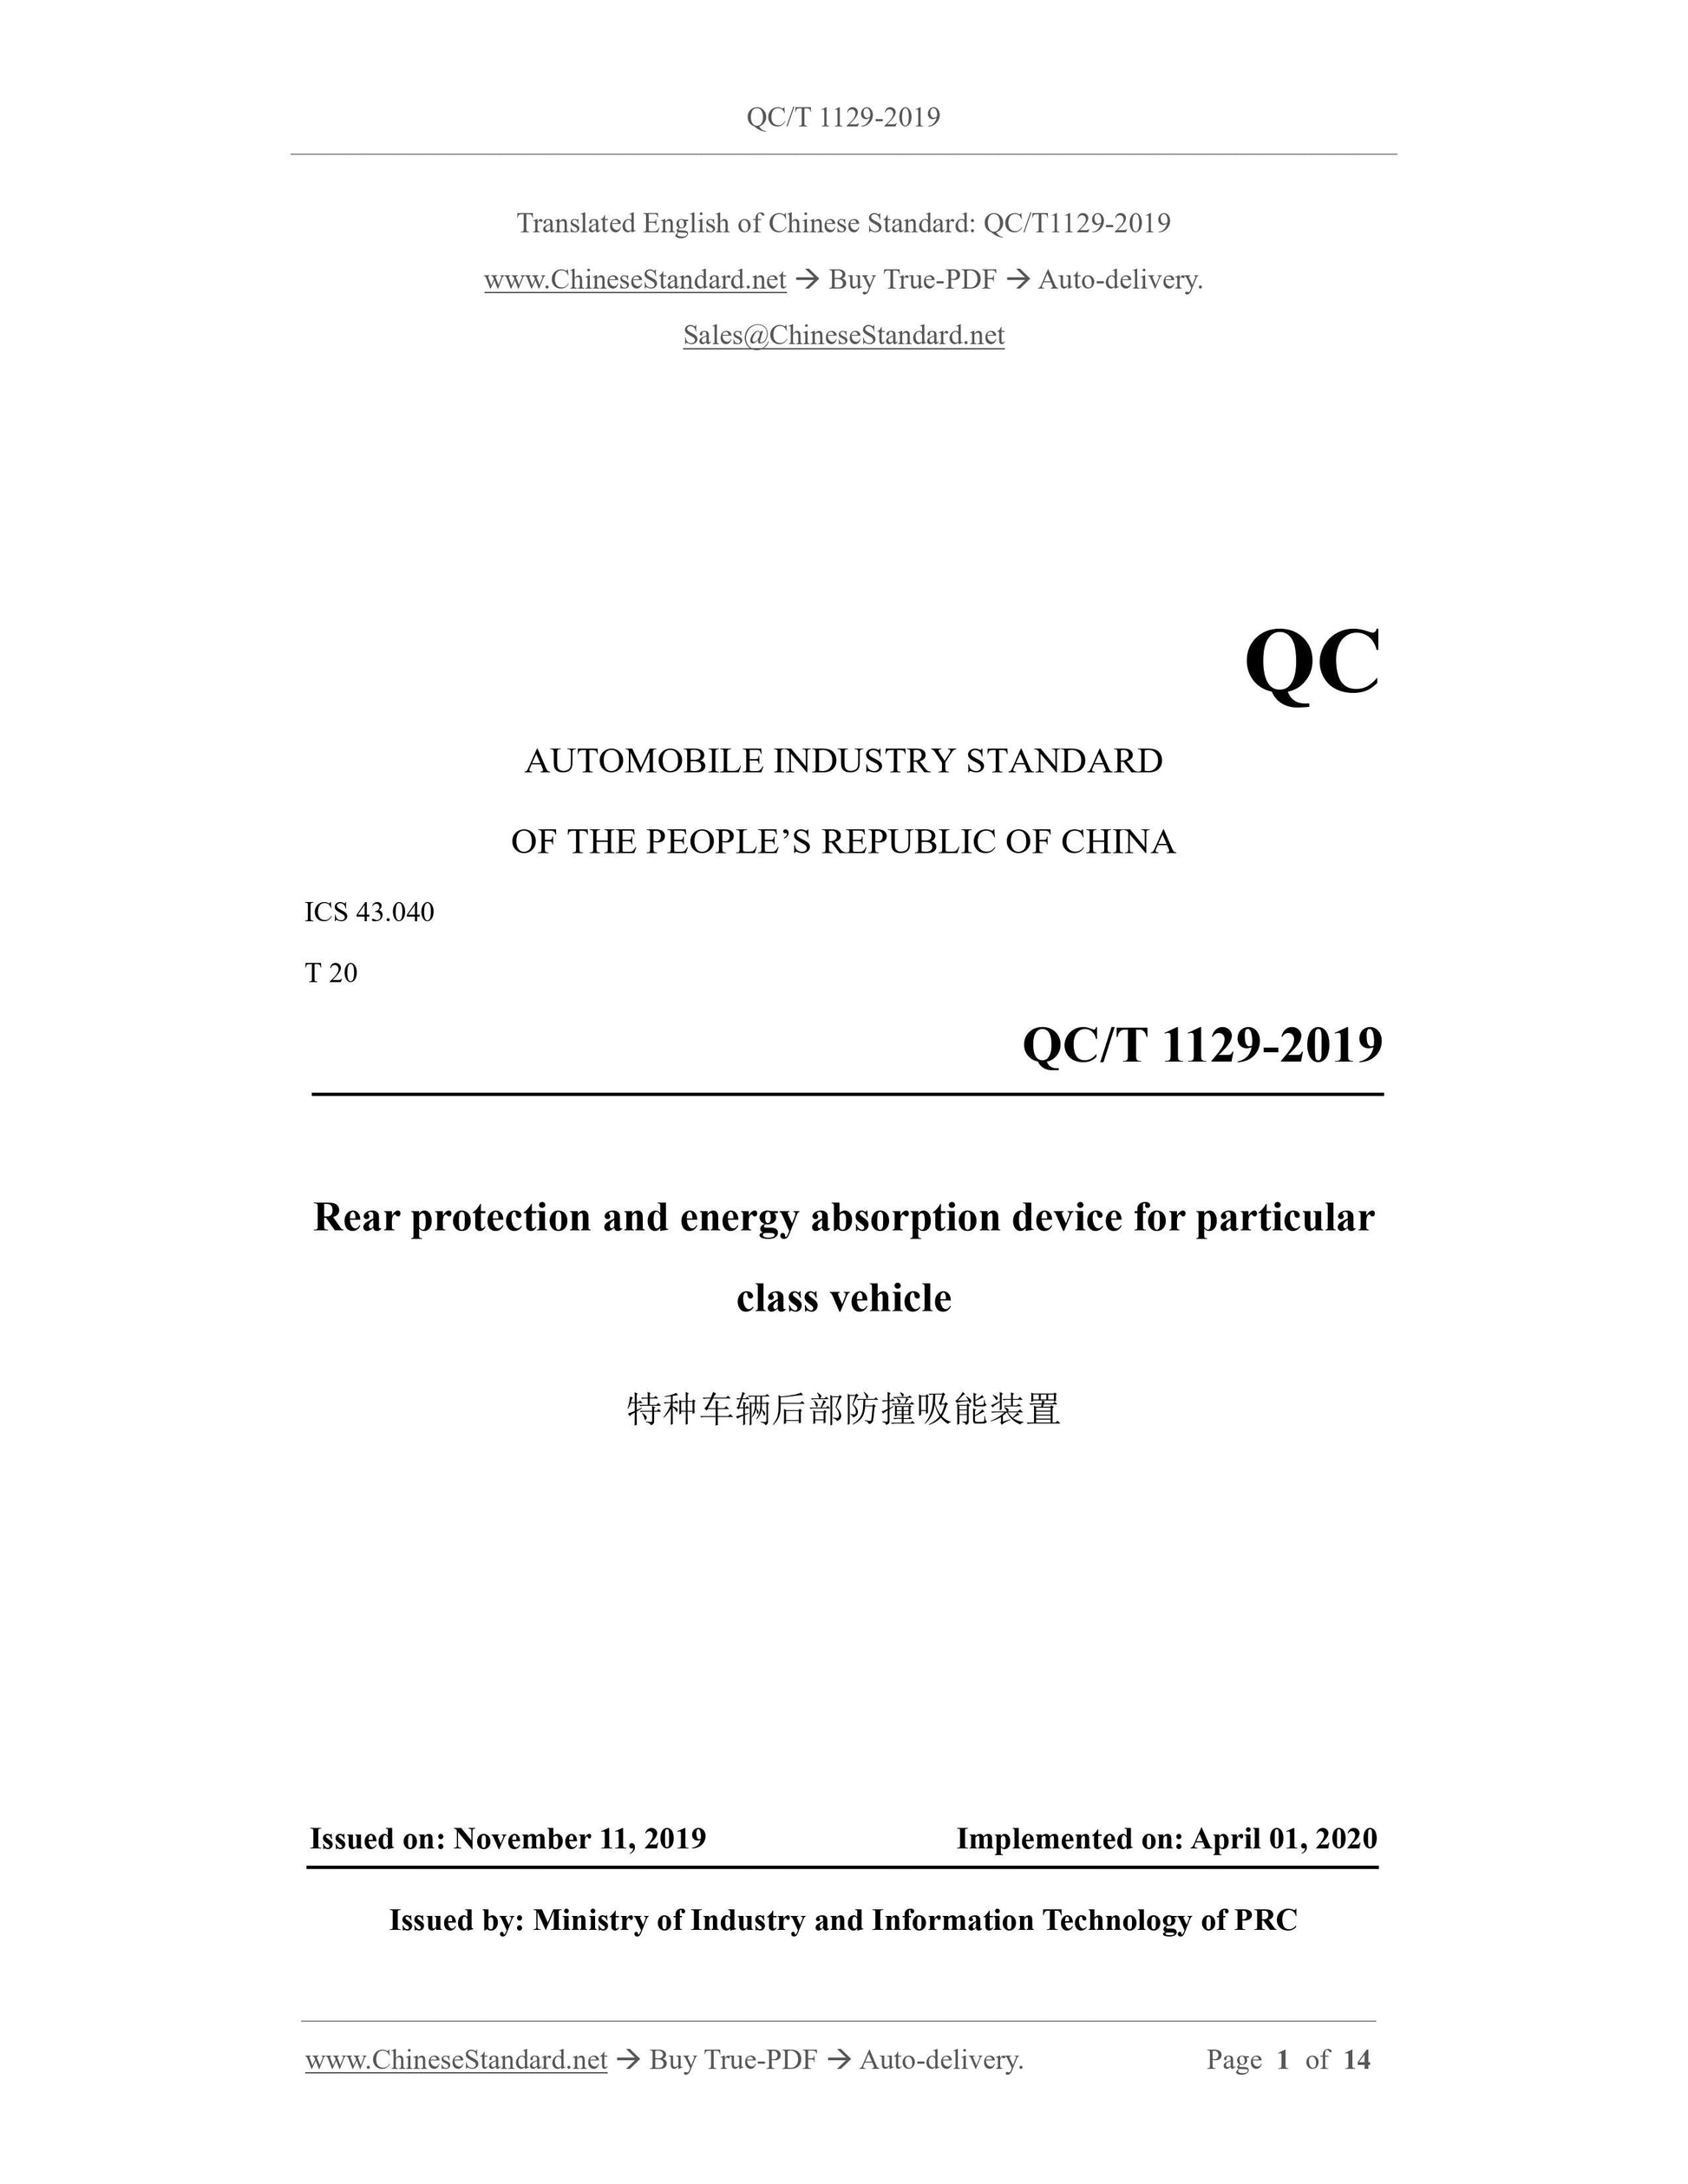 QC/T 1129-2019 Page 1